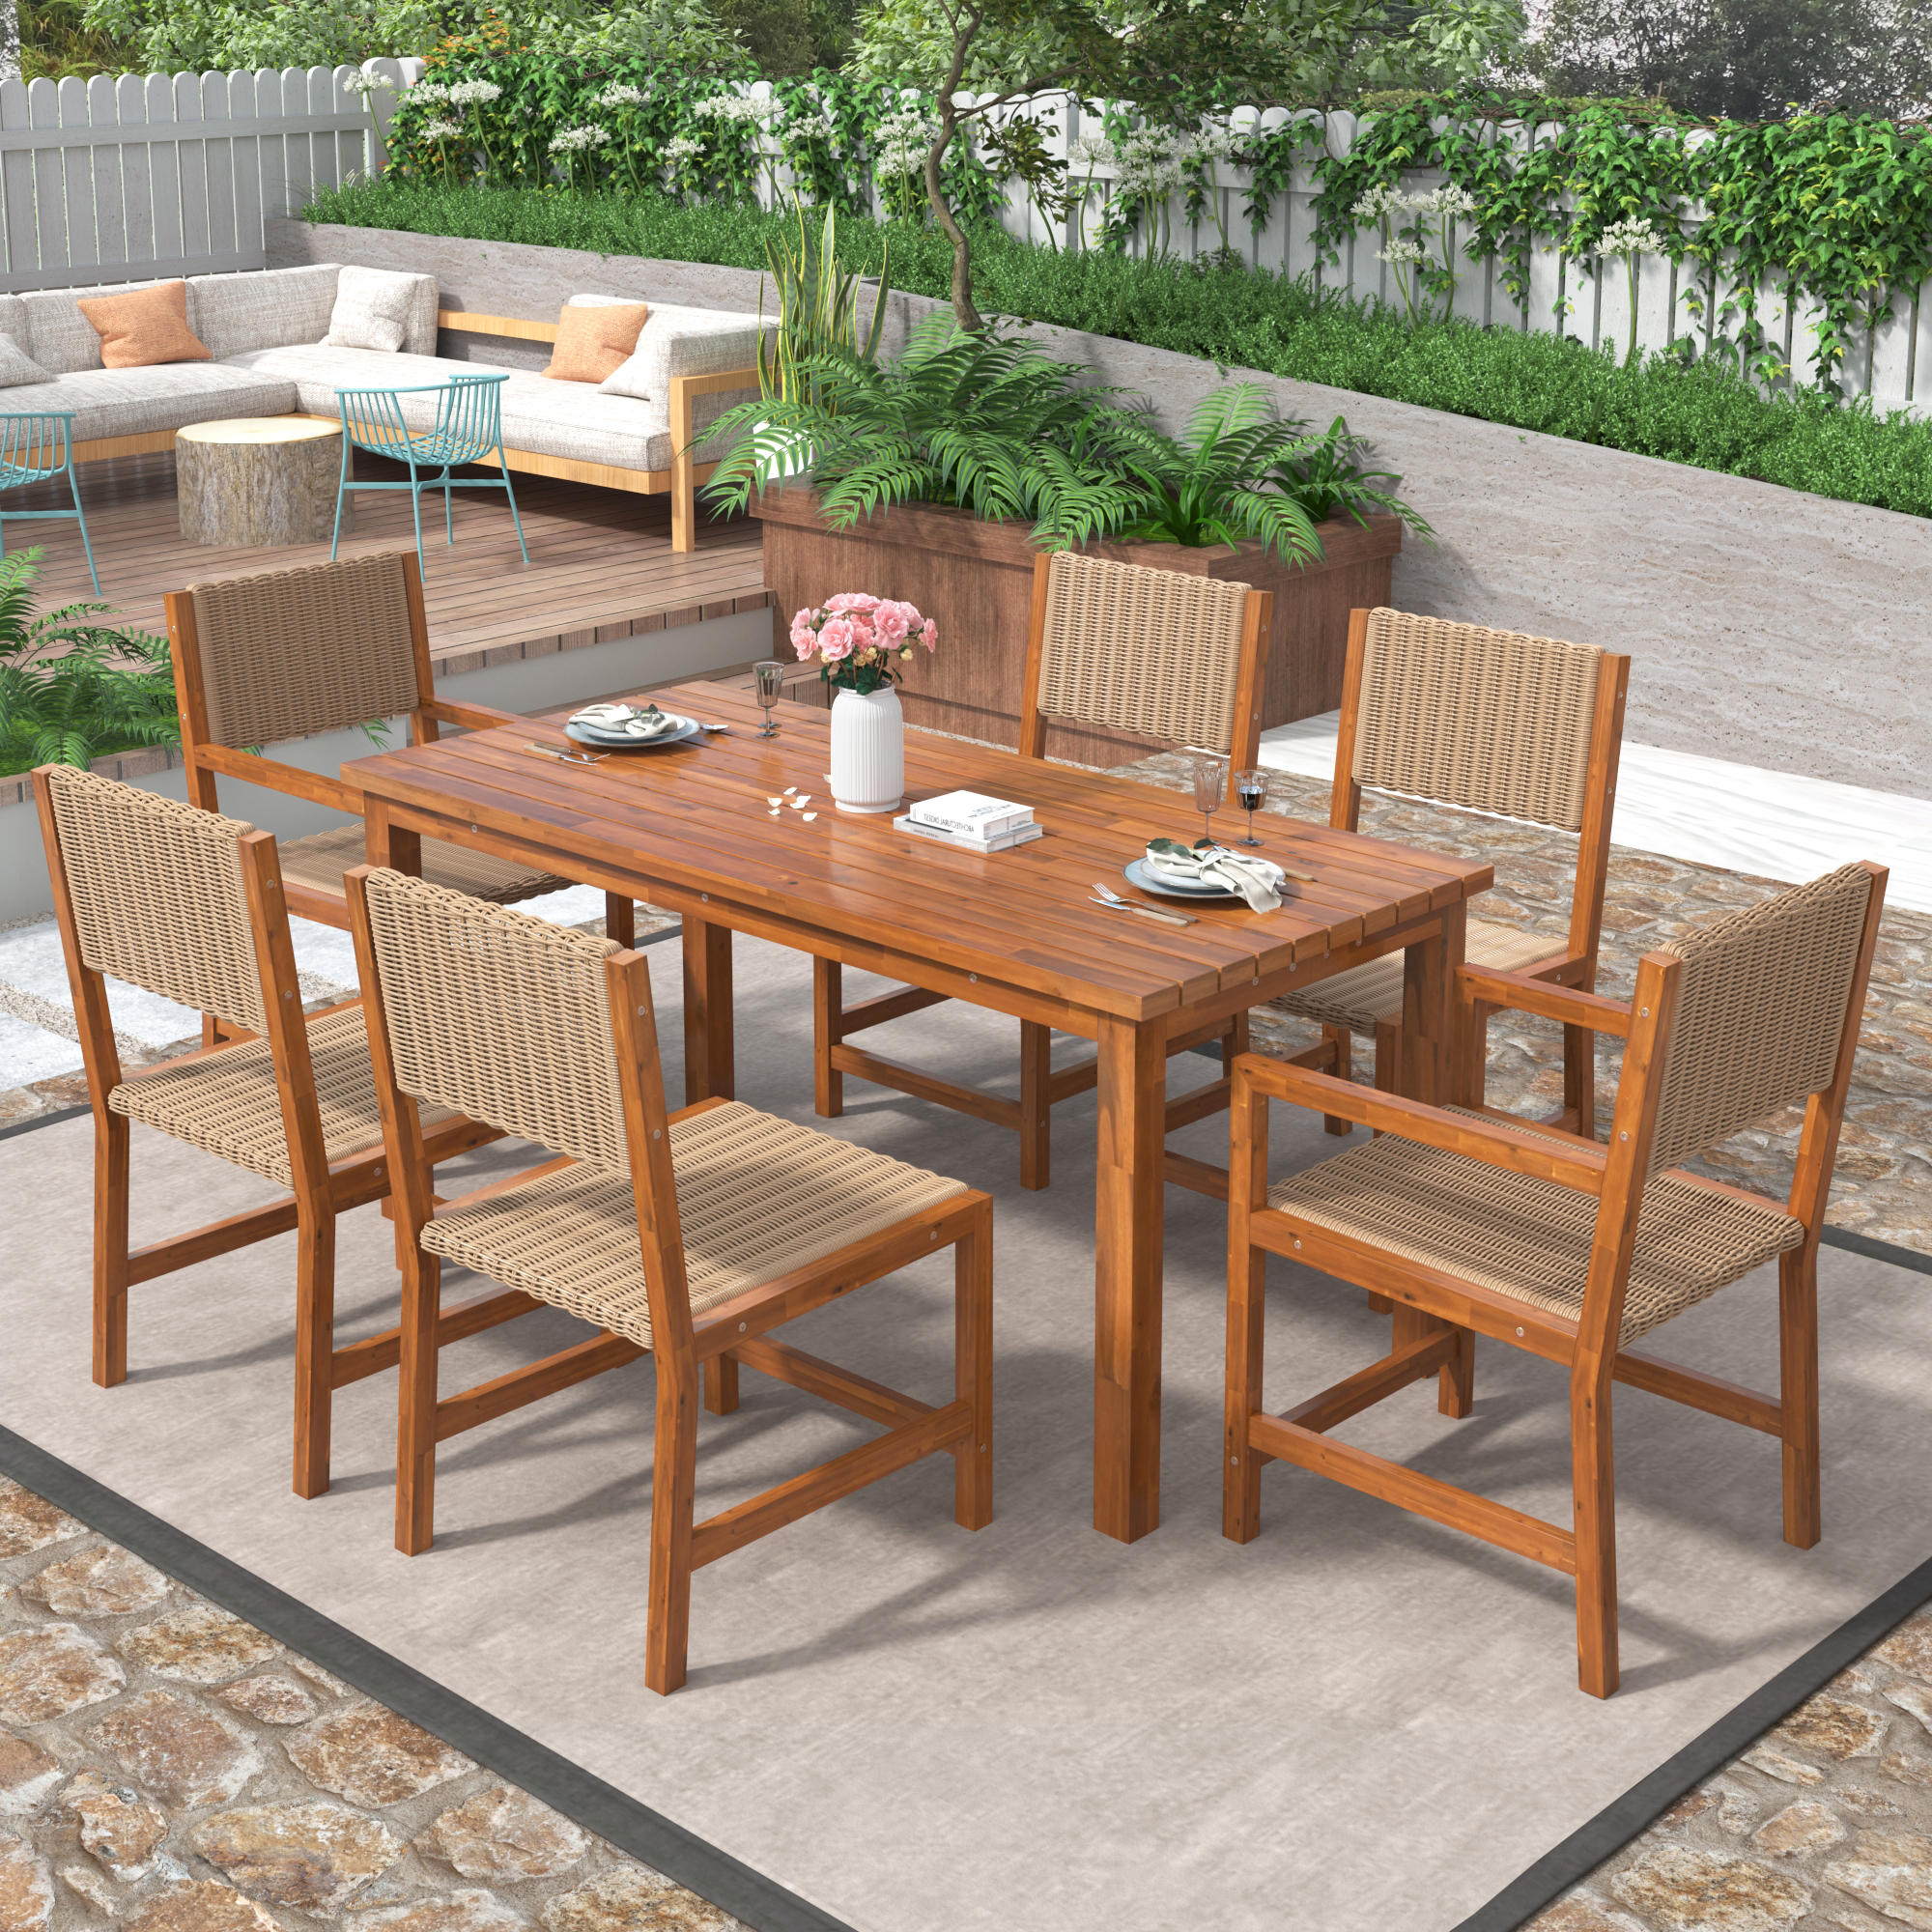 7 Piece Patio Rattan Dining Set, Outdoor Space Saving Rattan Chairs with Acacia Wood Table, All-Weather Dining Table and Chairs Set, HDPE Rattan Dining Chairs Set for Balcony Patio Garden Poolside - image 1 of 8